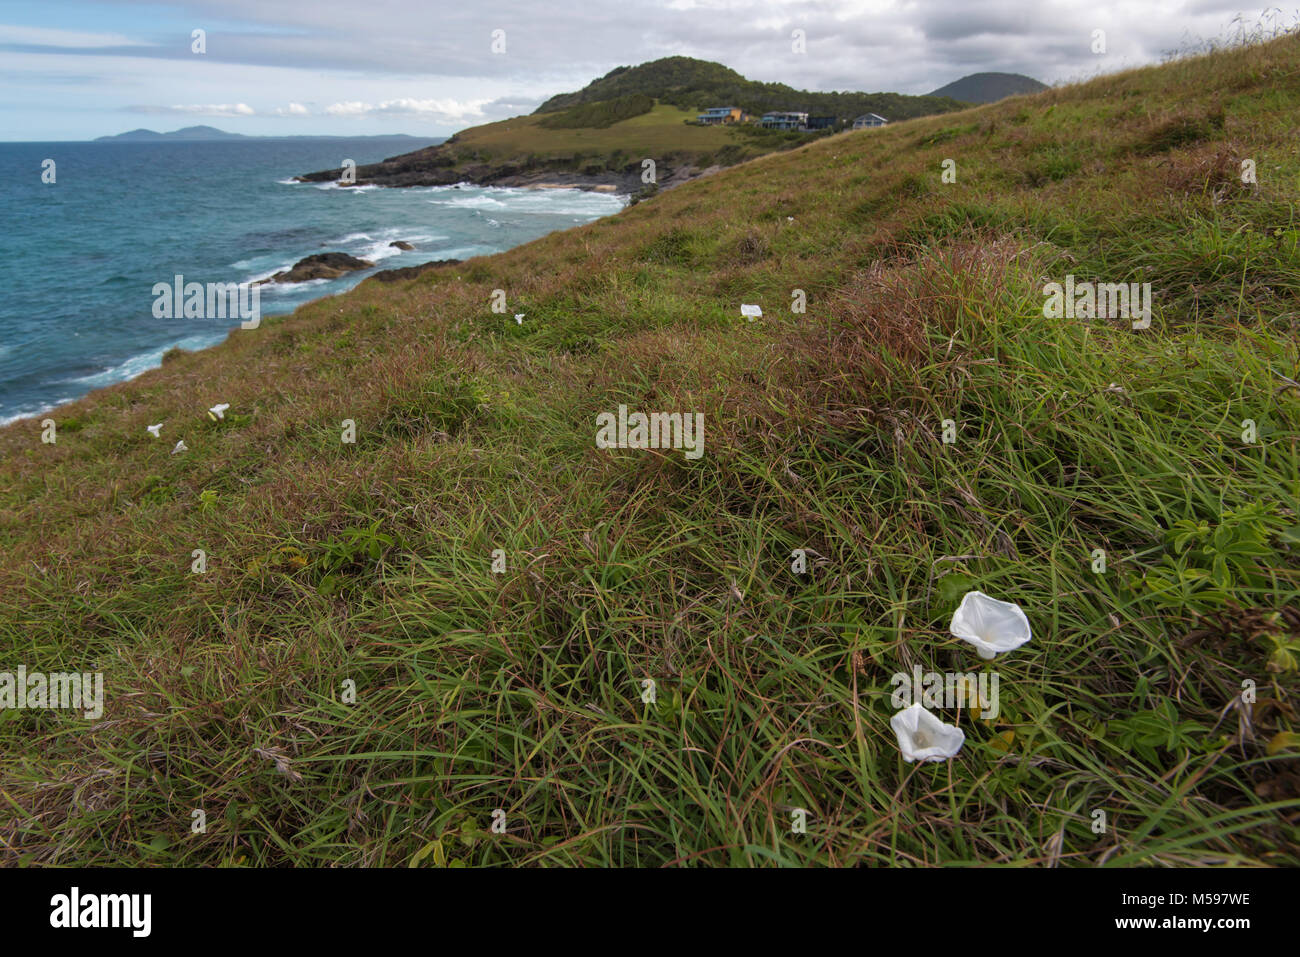 White flower heads of the Moon Flower (Ipomoea alba) an invasive pest plant (part of the Morning Glory family) appear among long grass on a headland. Stock Photo